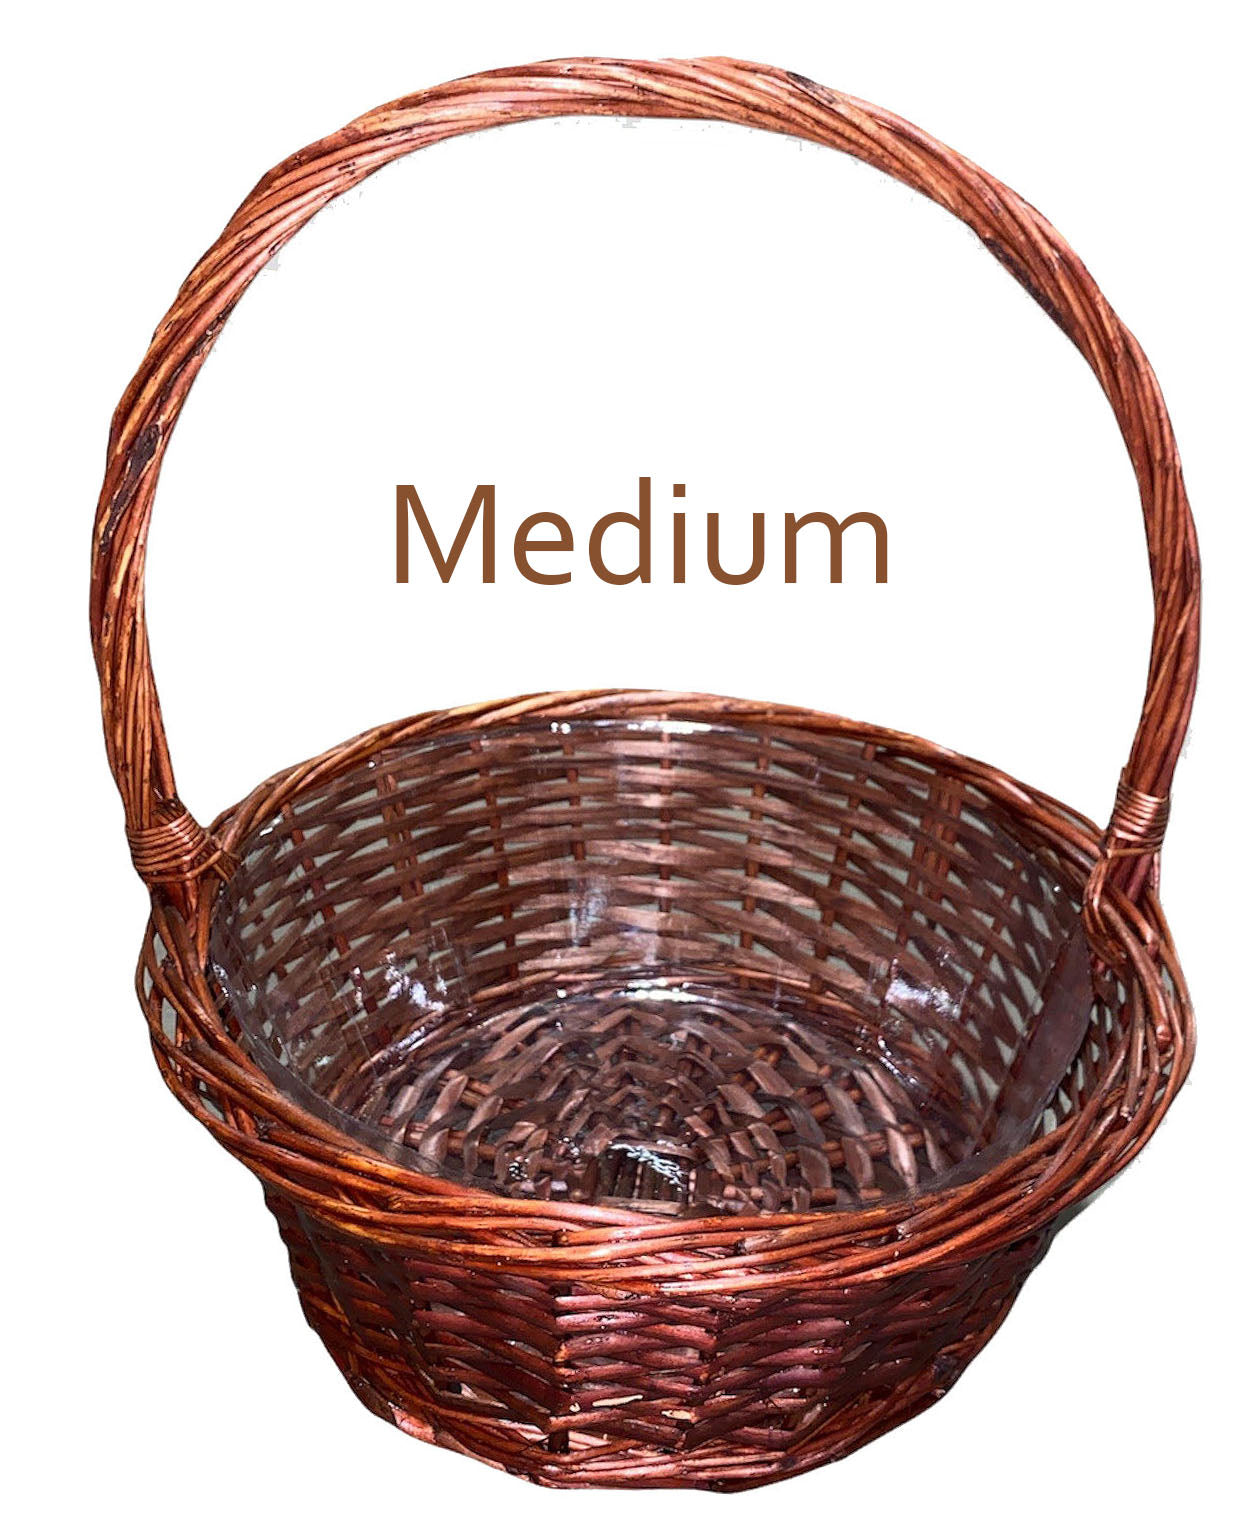 Round Split Willow Baskets with hard liners - Medium 12.36 x 4.7 inch deep - NEW222